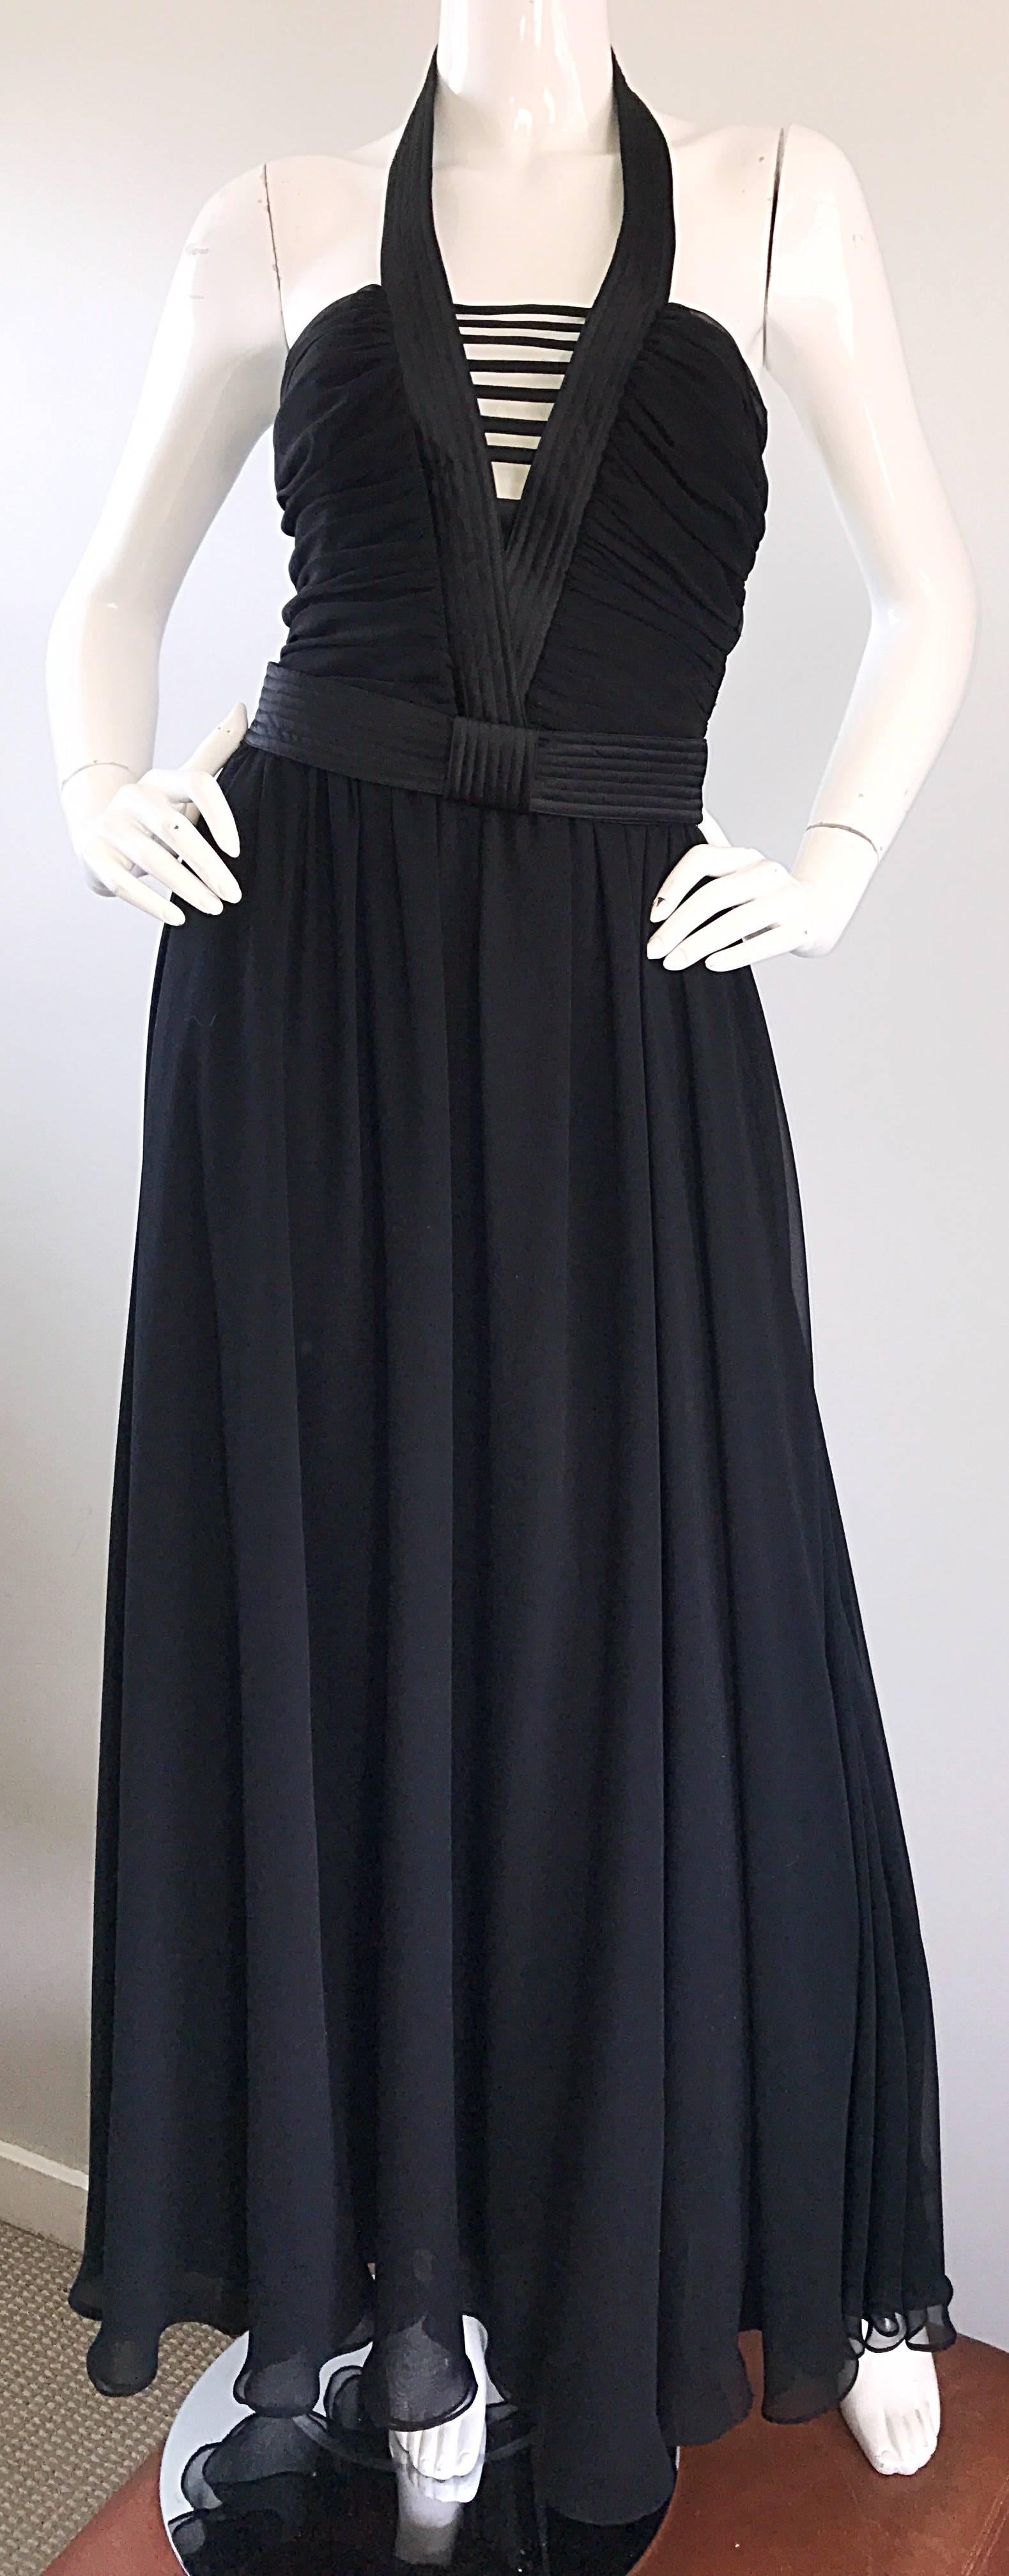 1970s Frank Usher Black Chiffon Cut - Out Belted 70s Vintage Evening Gown Dress In Excellent Condition For Sale In San Diego, CA